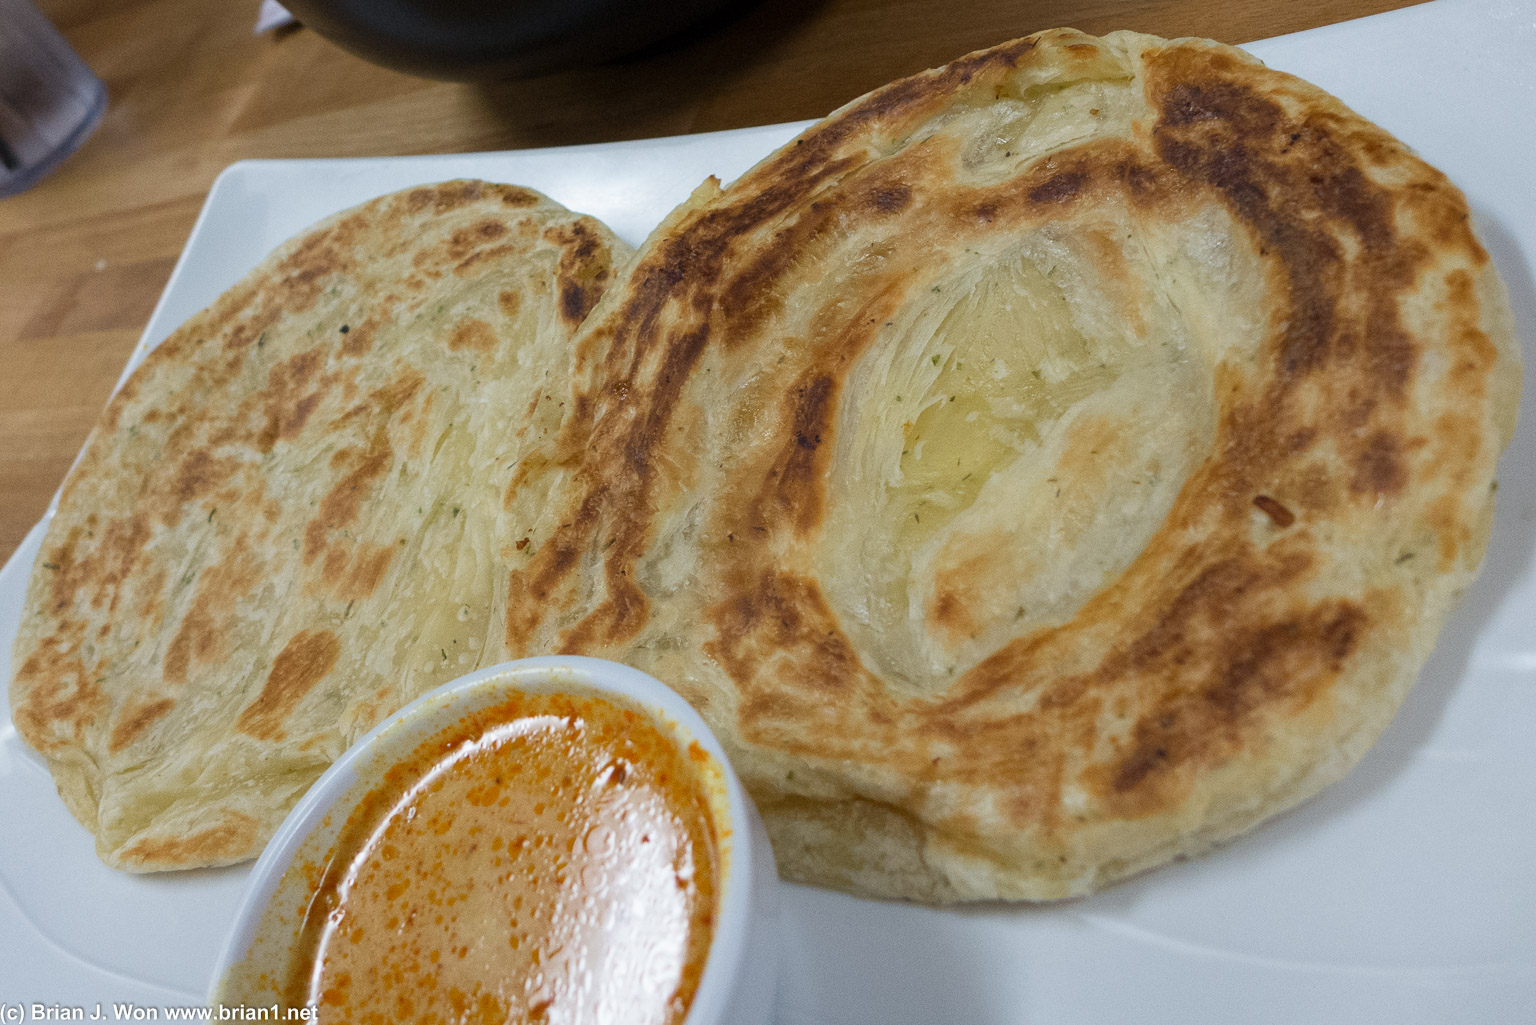 Roti. All the food here was kinda... meh. Decent but nowhere near as awesome as the real thing in SE Asia.